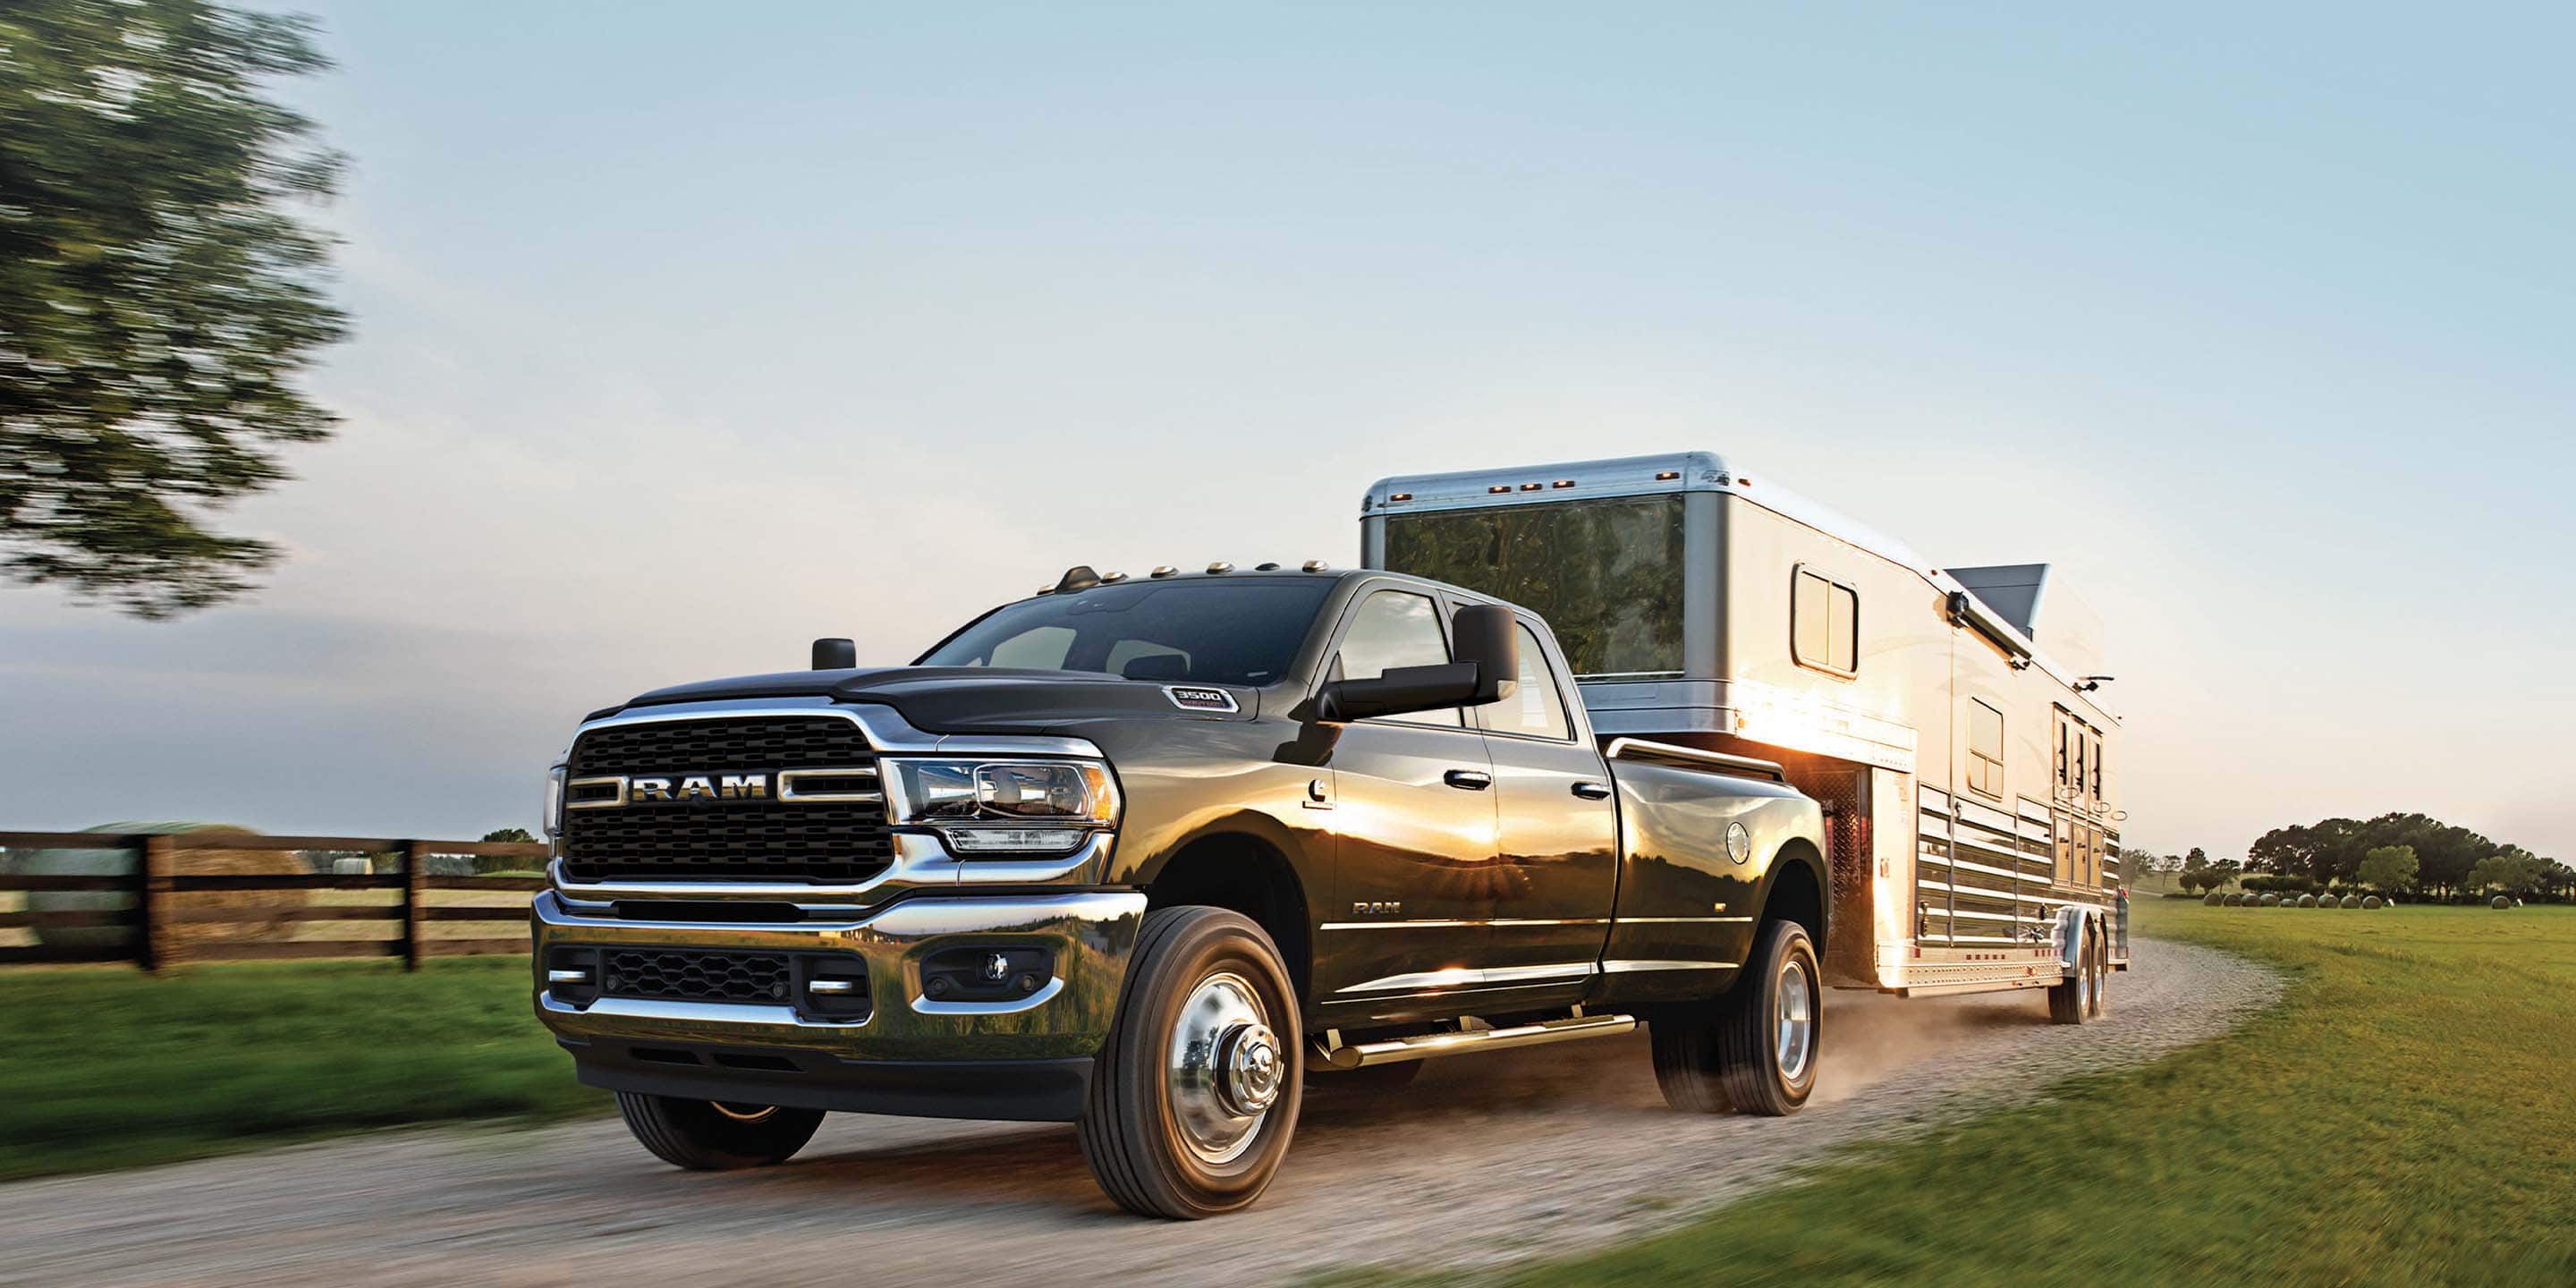 The 2022 Ram 3500 Big Horn towing an RV on a country road.